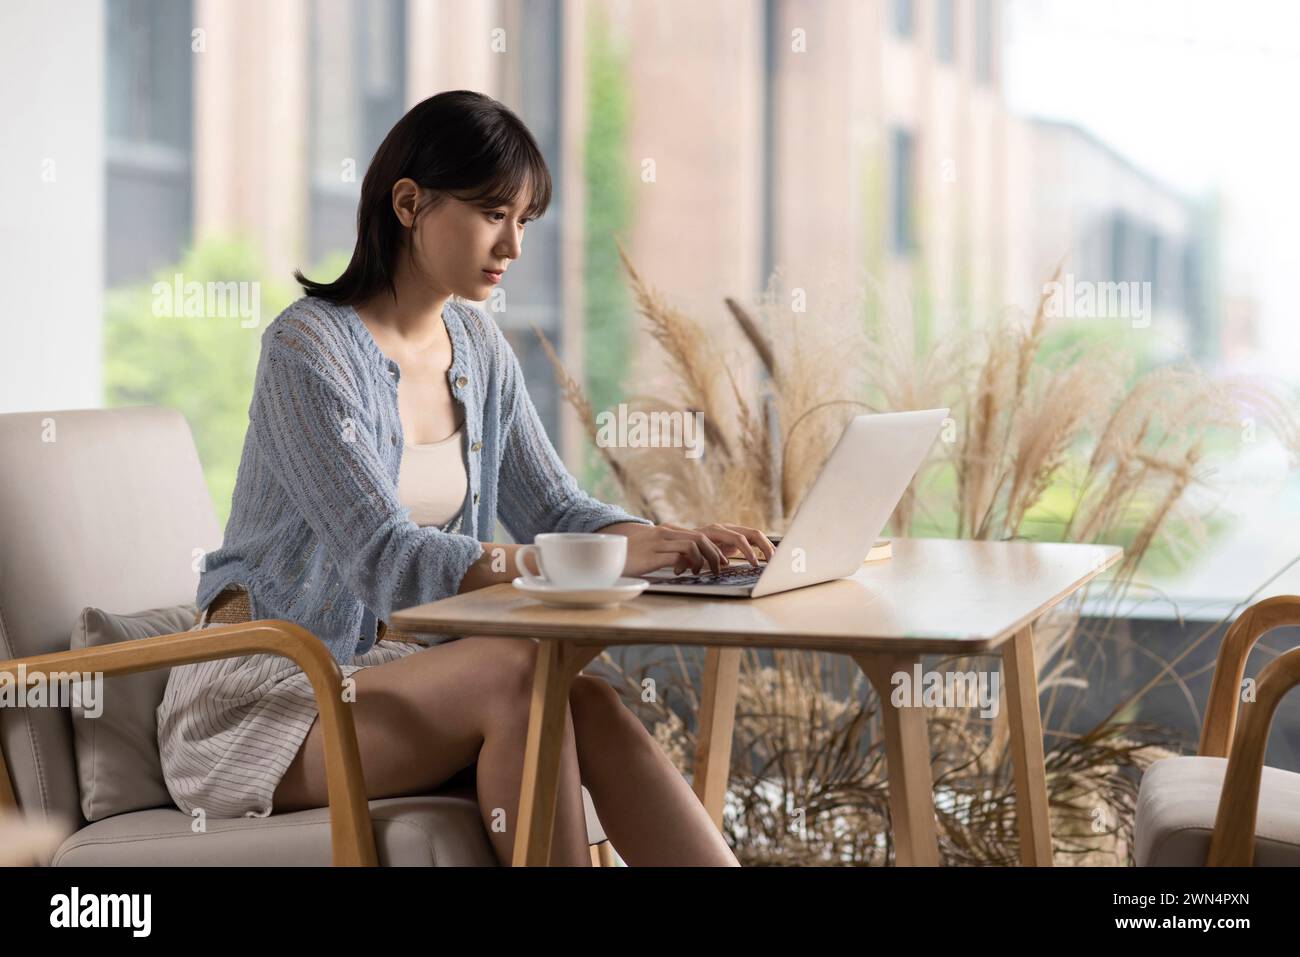 Young woman using laptop in café Stock Photo